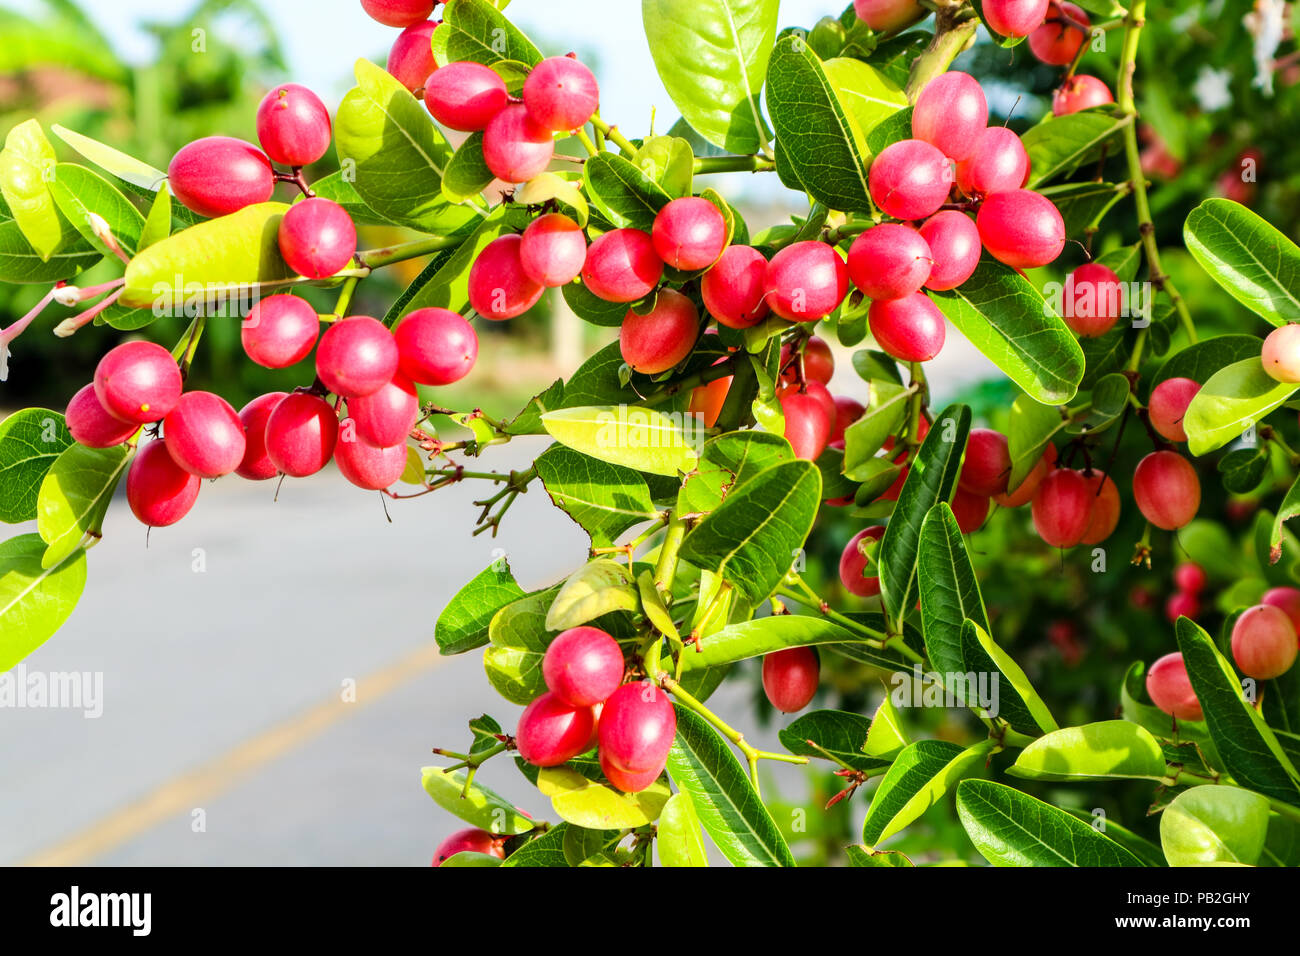 Carunda or Karonda fruit used to herb and medicine, red berry fruit and green leaves Stock Photo